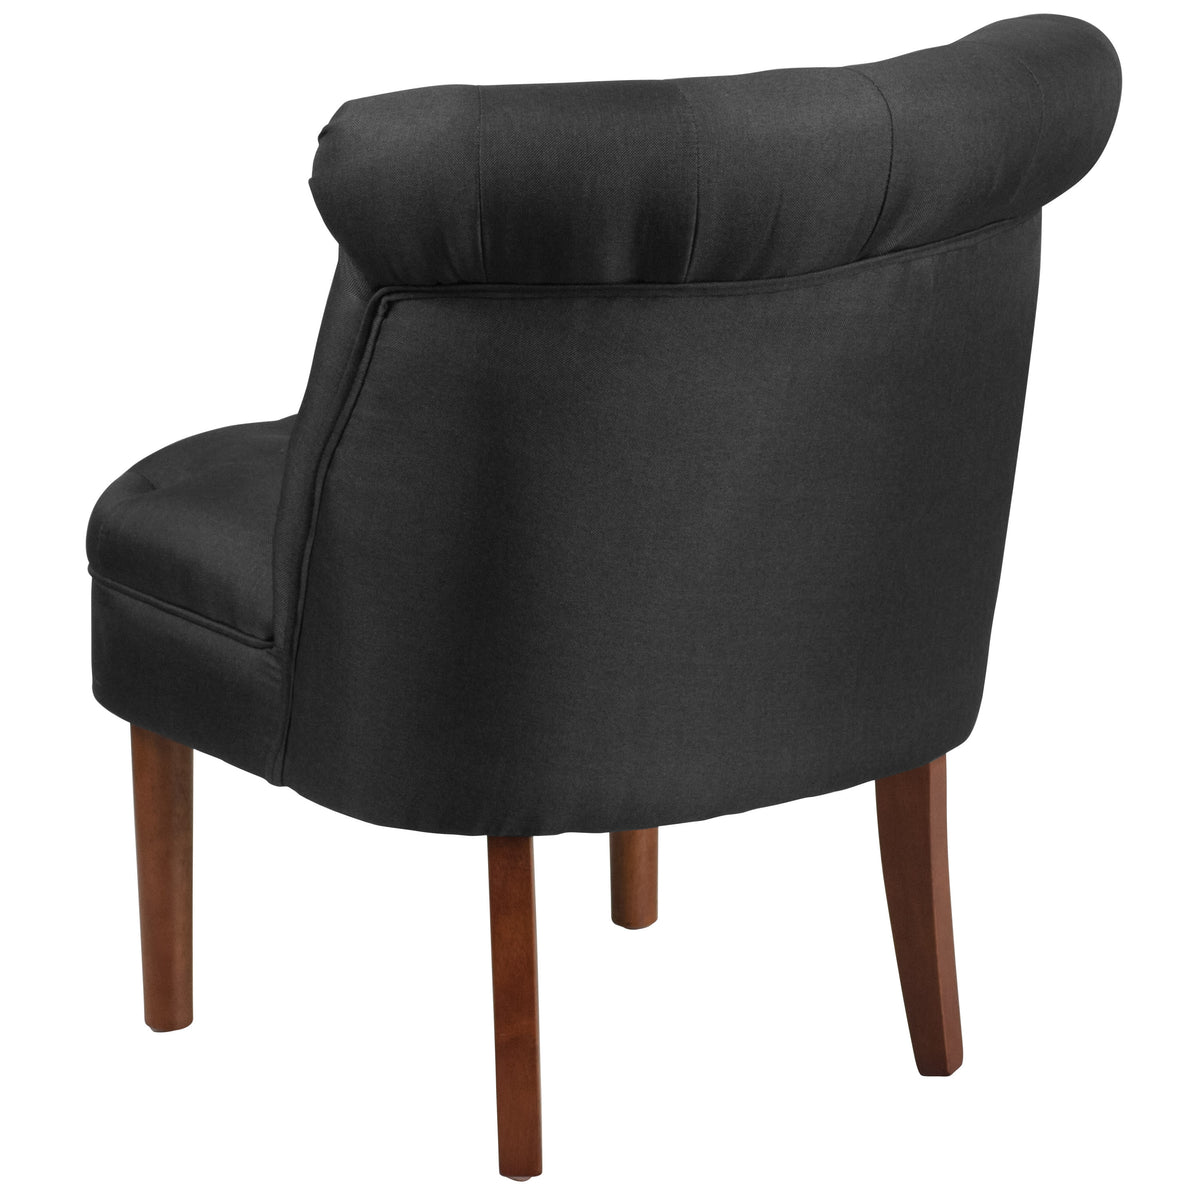 Black |#| Black Fabric Upholstered Button Tufted Rolled Back Chair with Wooden Legs